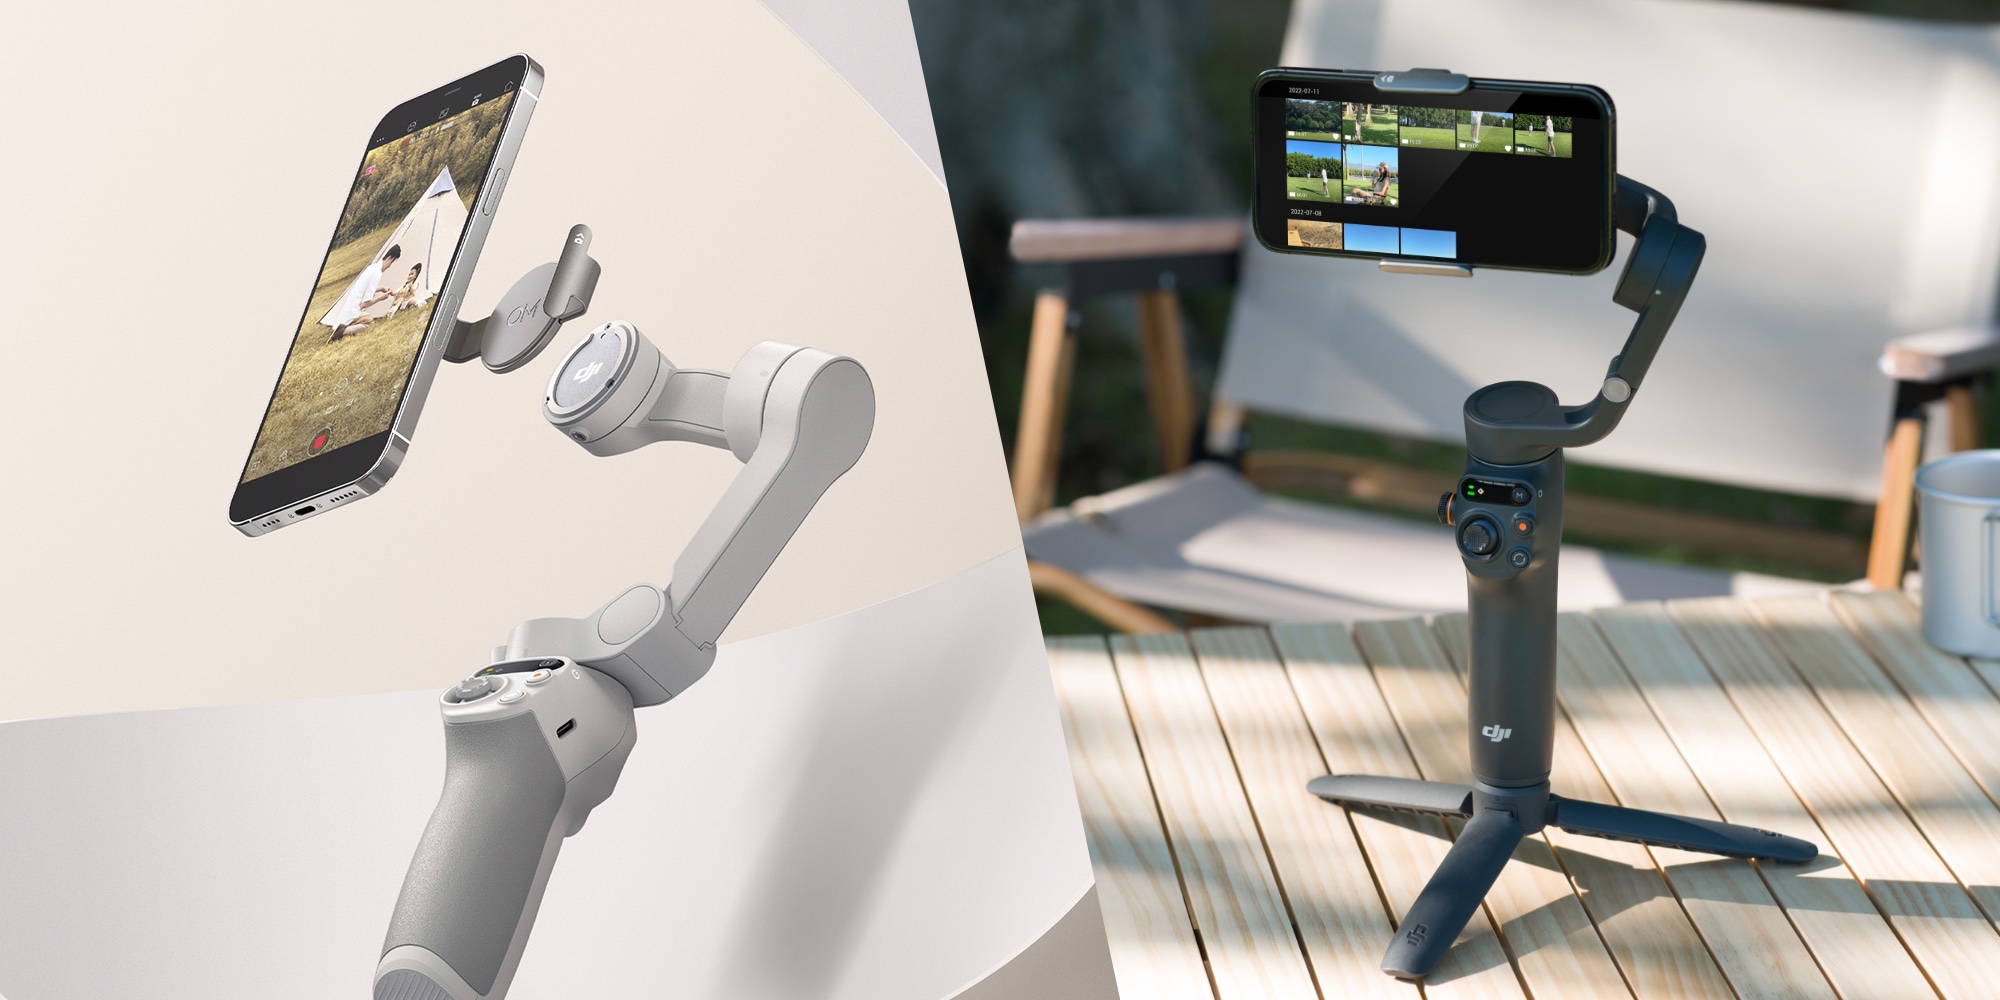 DJI's new Osmo Mobile 6/SE iPhone gimbals see first discounts from